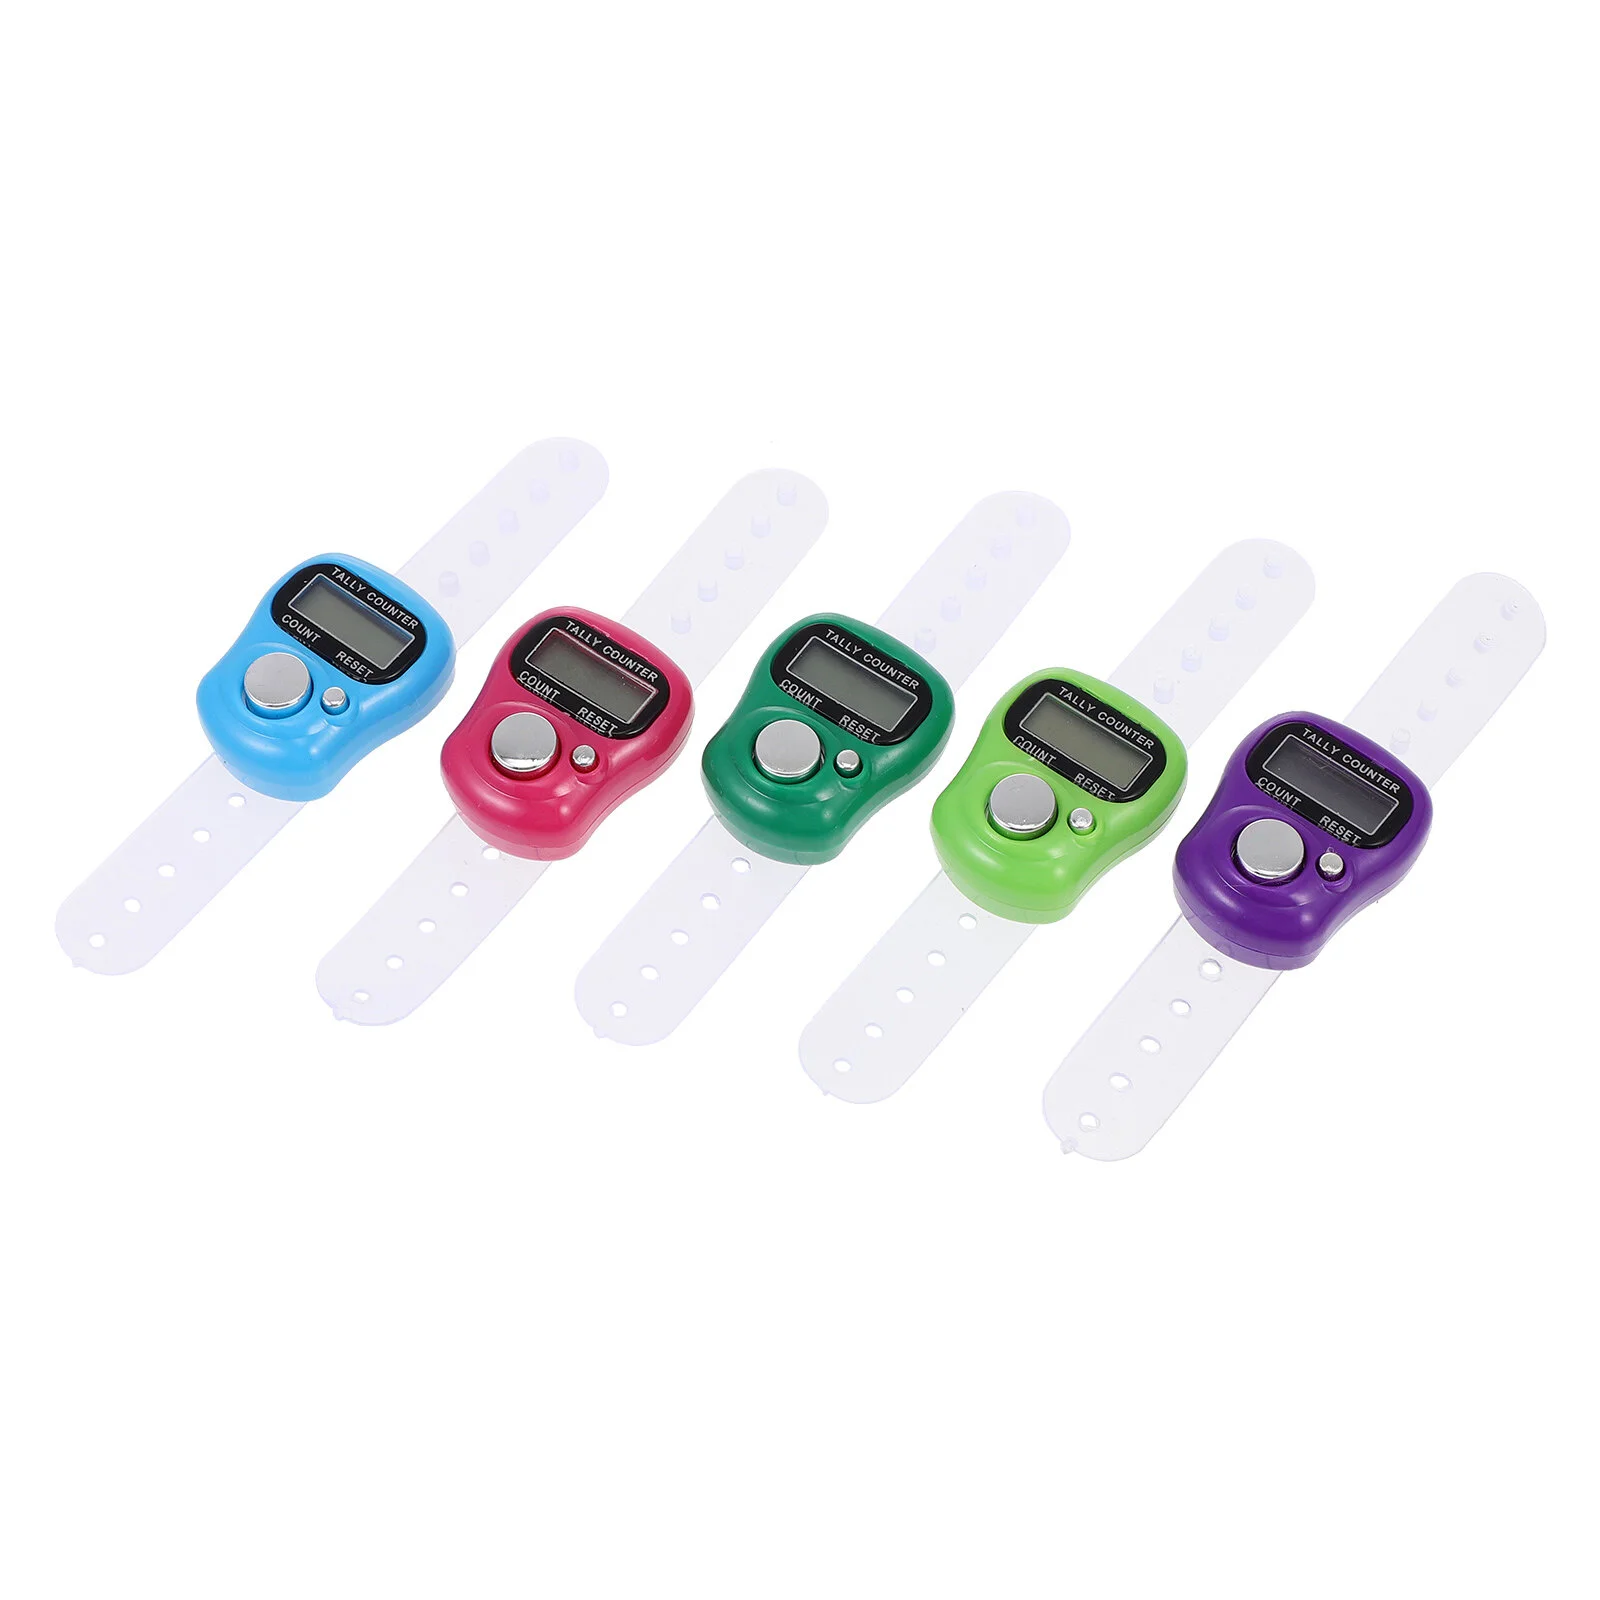 

Counter Finger Clicker Tally Digital Hand Counters Ring Row Stitch Lap Clickers Knitting Knit Crochet Mechanical Counting Led